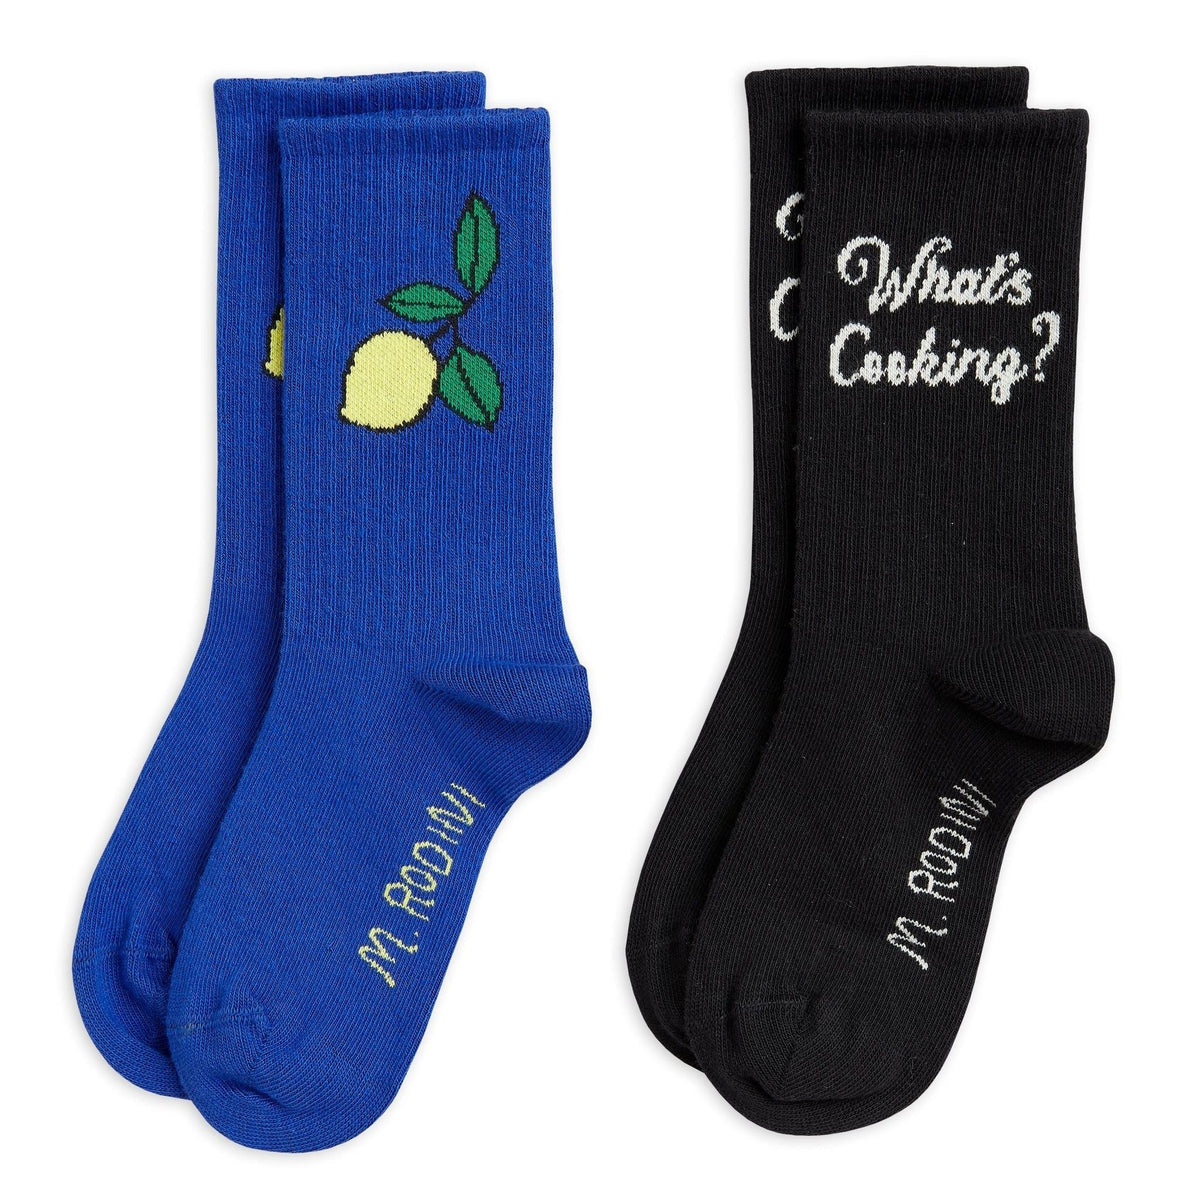 Whats Cooking 2-Pack Socks